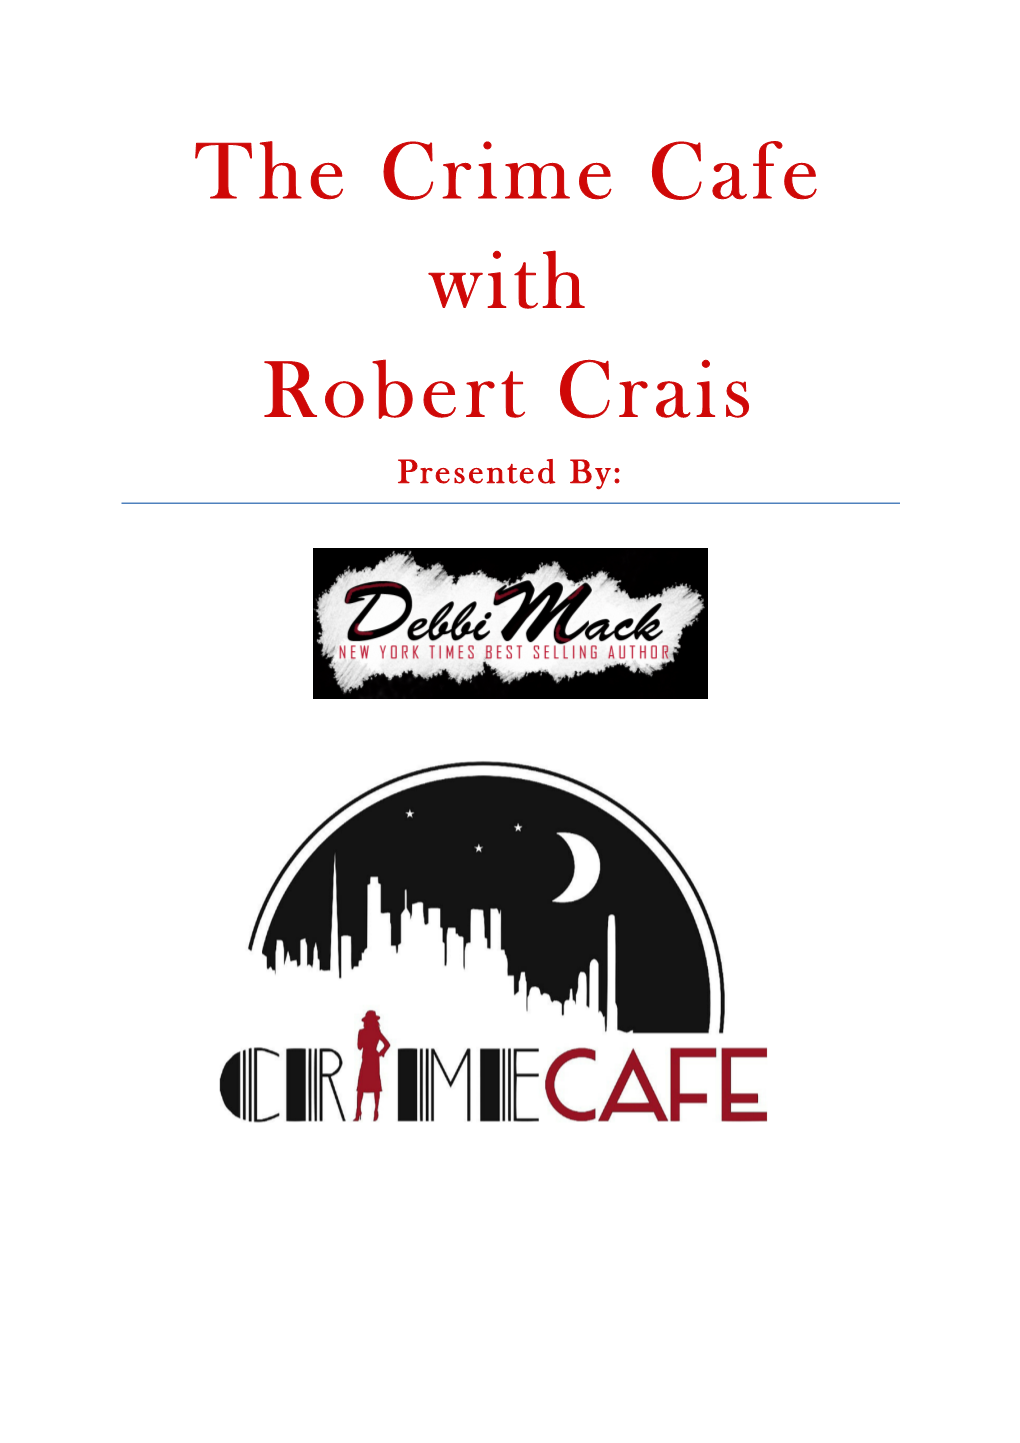 The Crime Cafe with Robert Crais Presented By